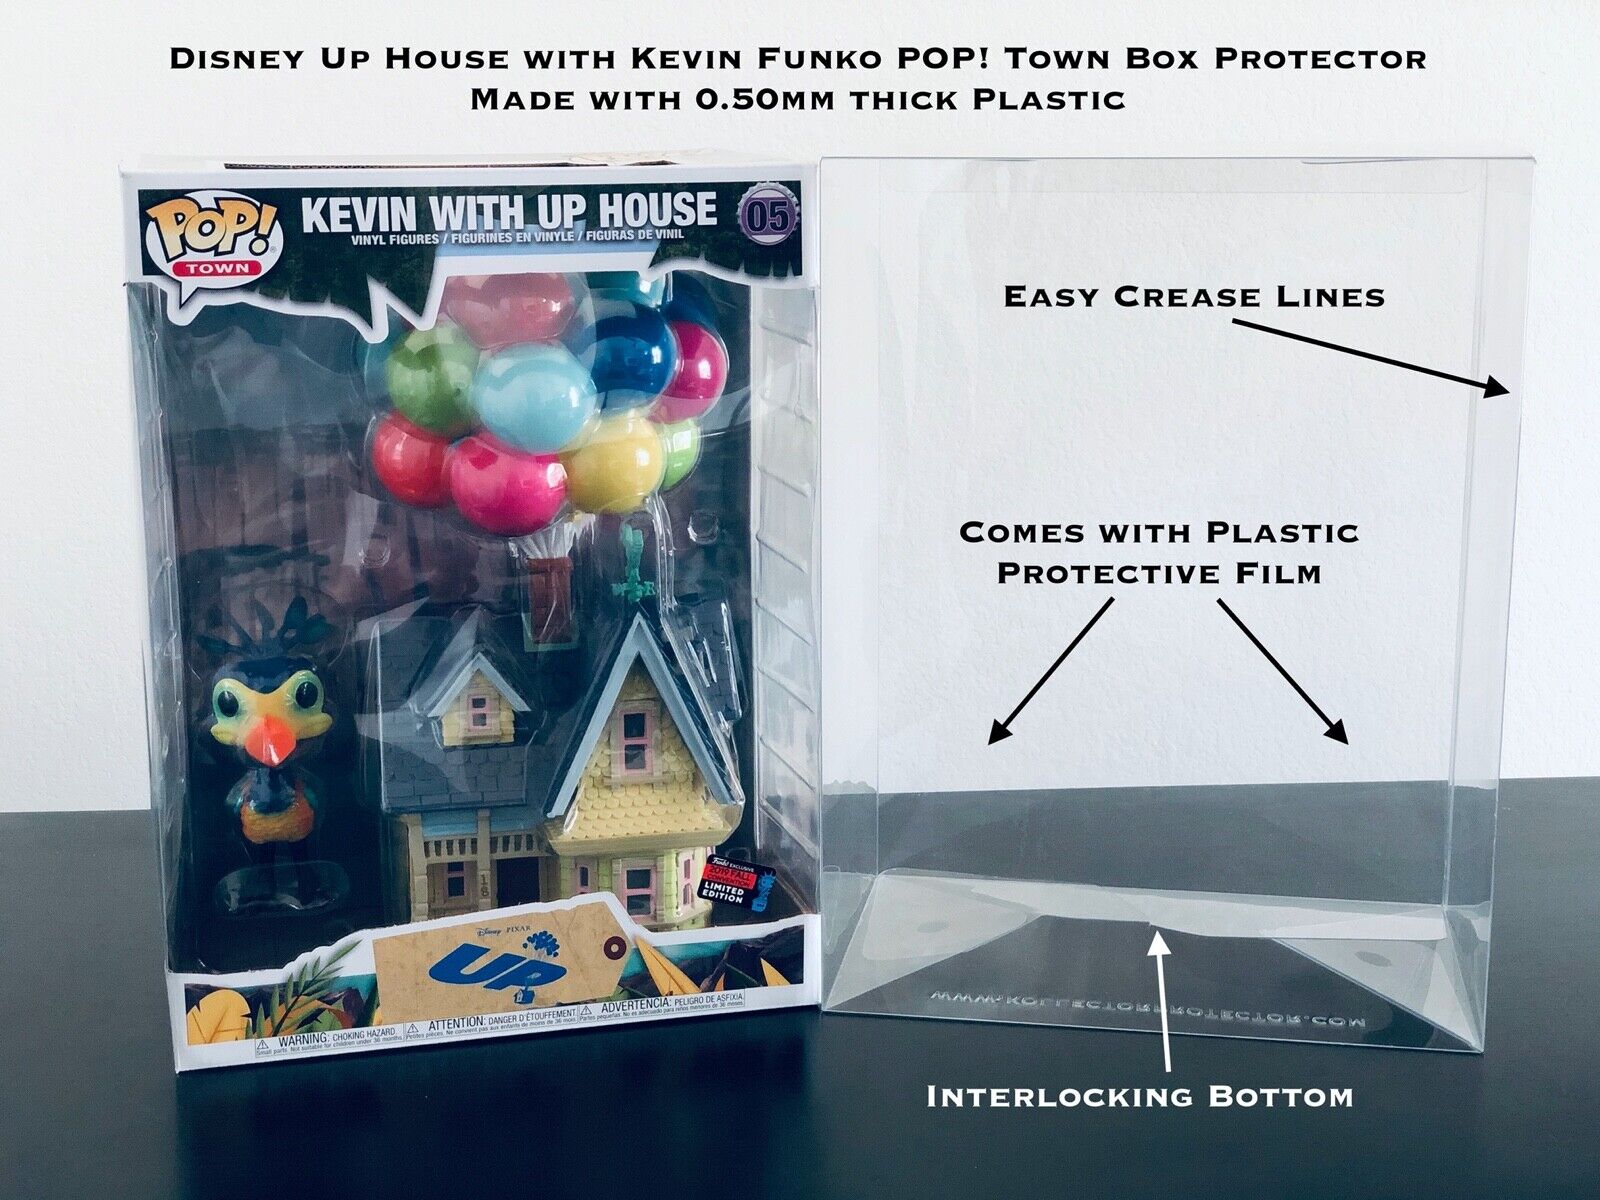 Funko POP Box Protector 0.50mm thick Plastic Only Fits Disney Up House w/ Kevin